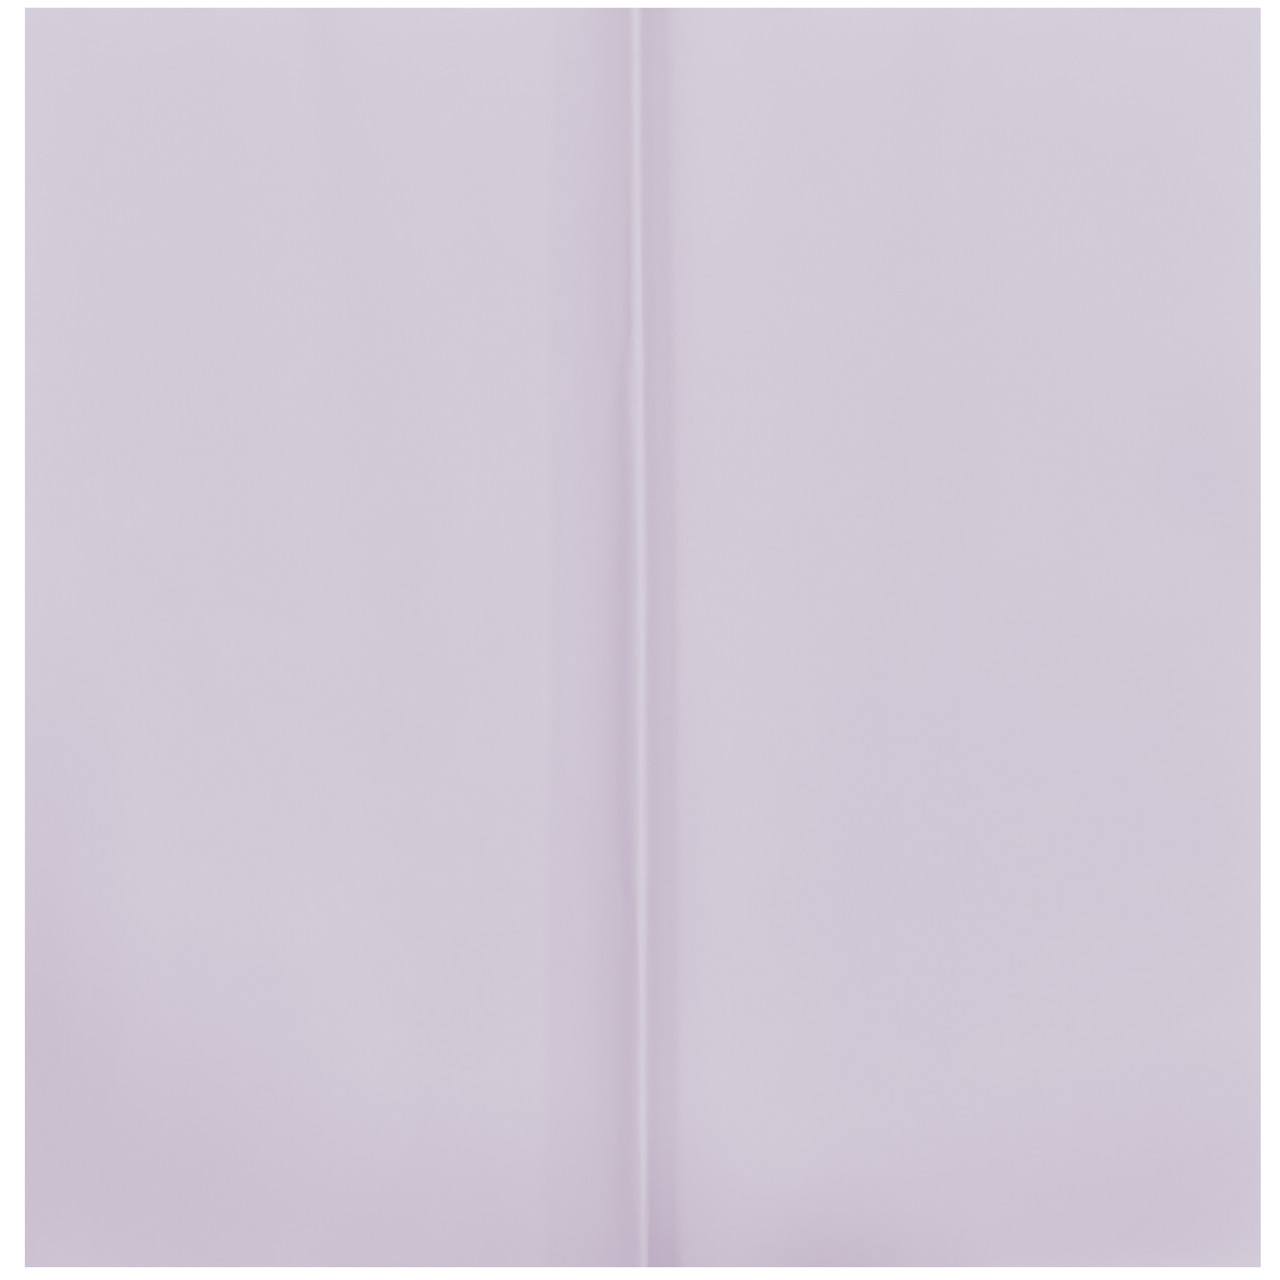 Lavender Floral Wrapping Paper - 20 Sheets - LO Florist Supplies